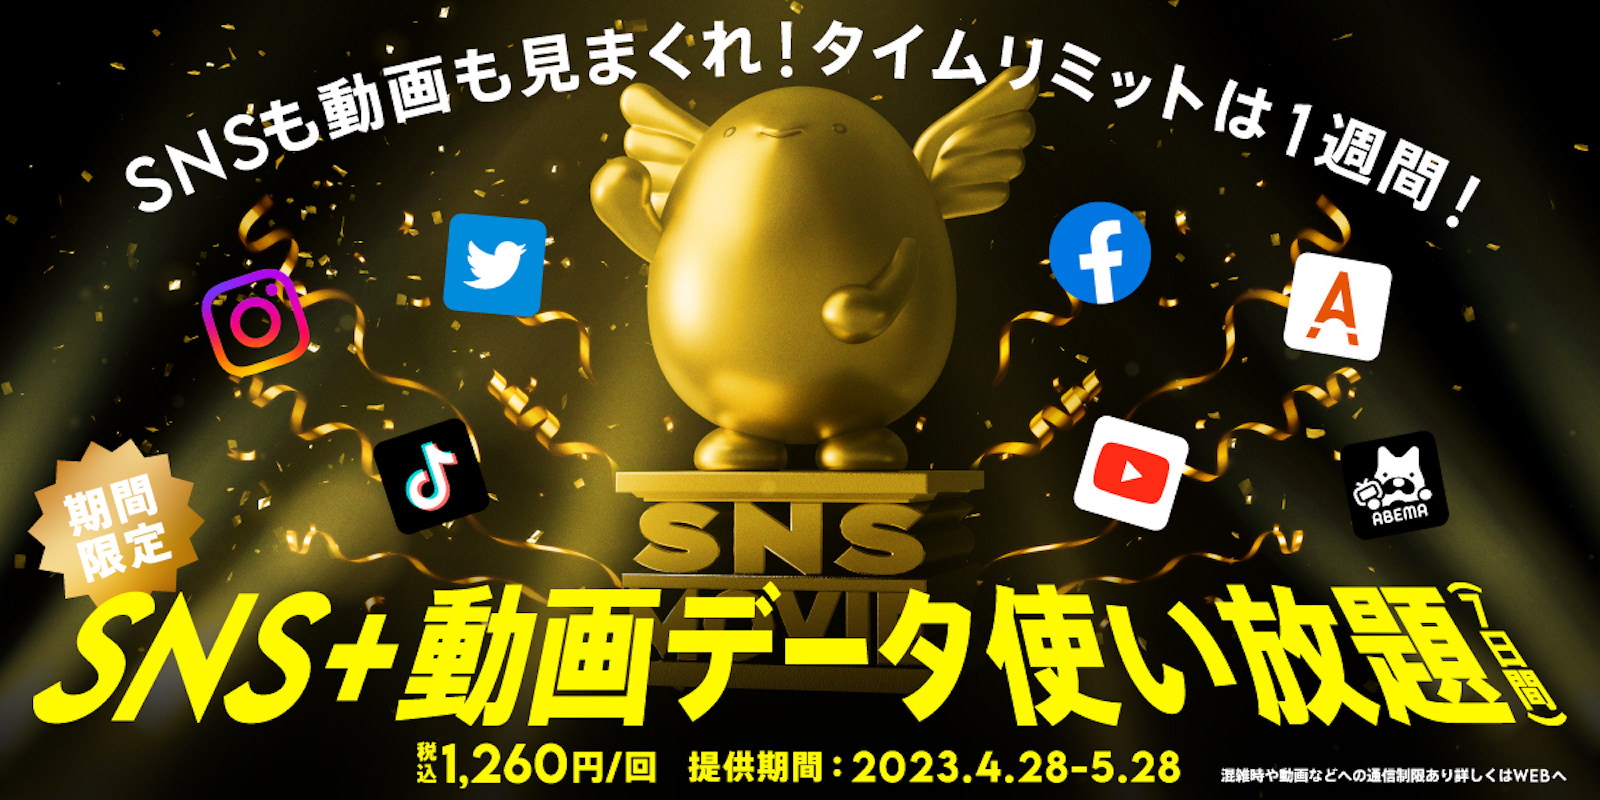 SNS Video All free for a week